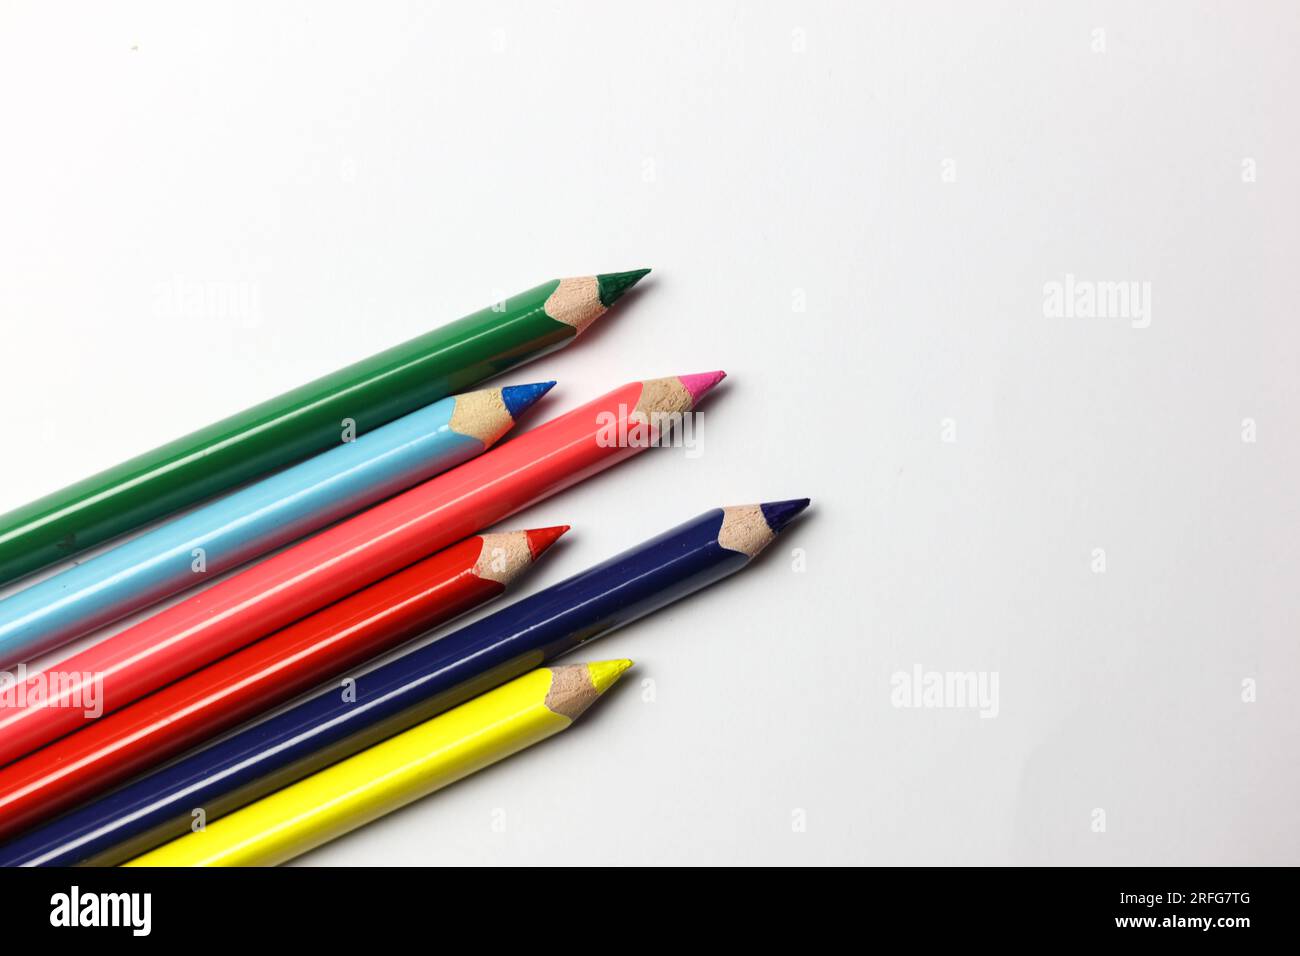 Rainbow Colored Pencils Forming a Circle on White Background Photograph by  Ocean Breeze - Pixels